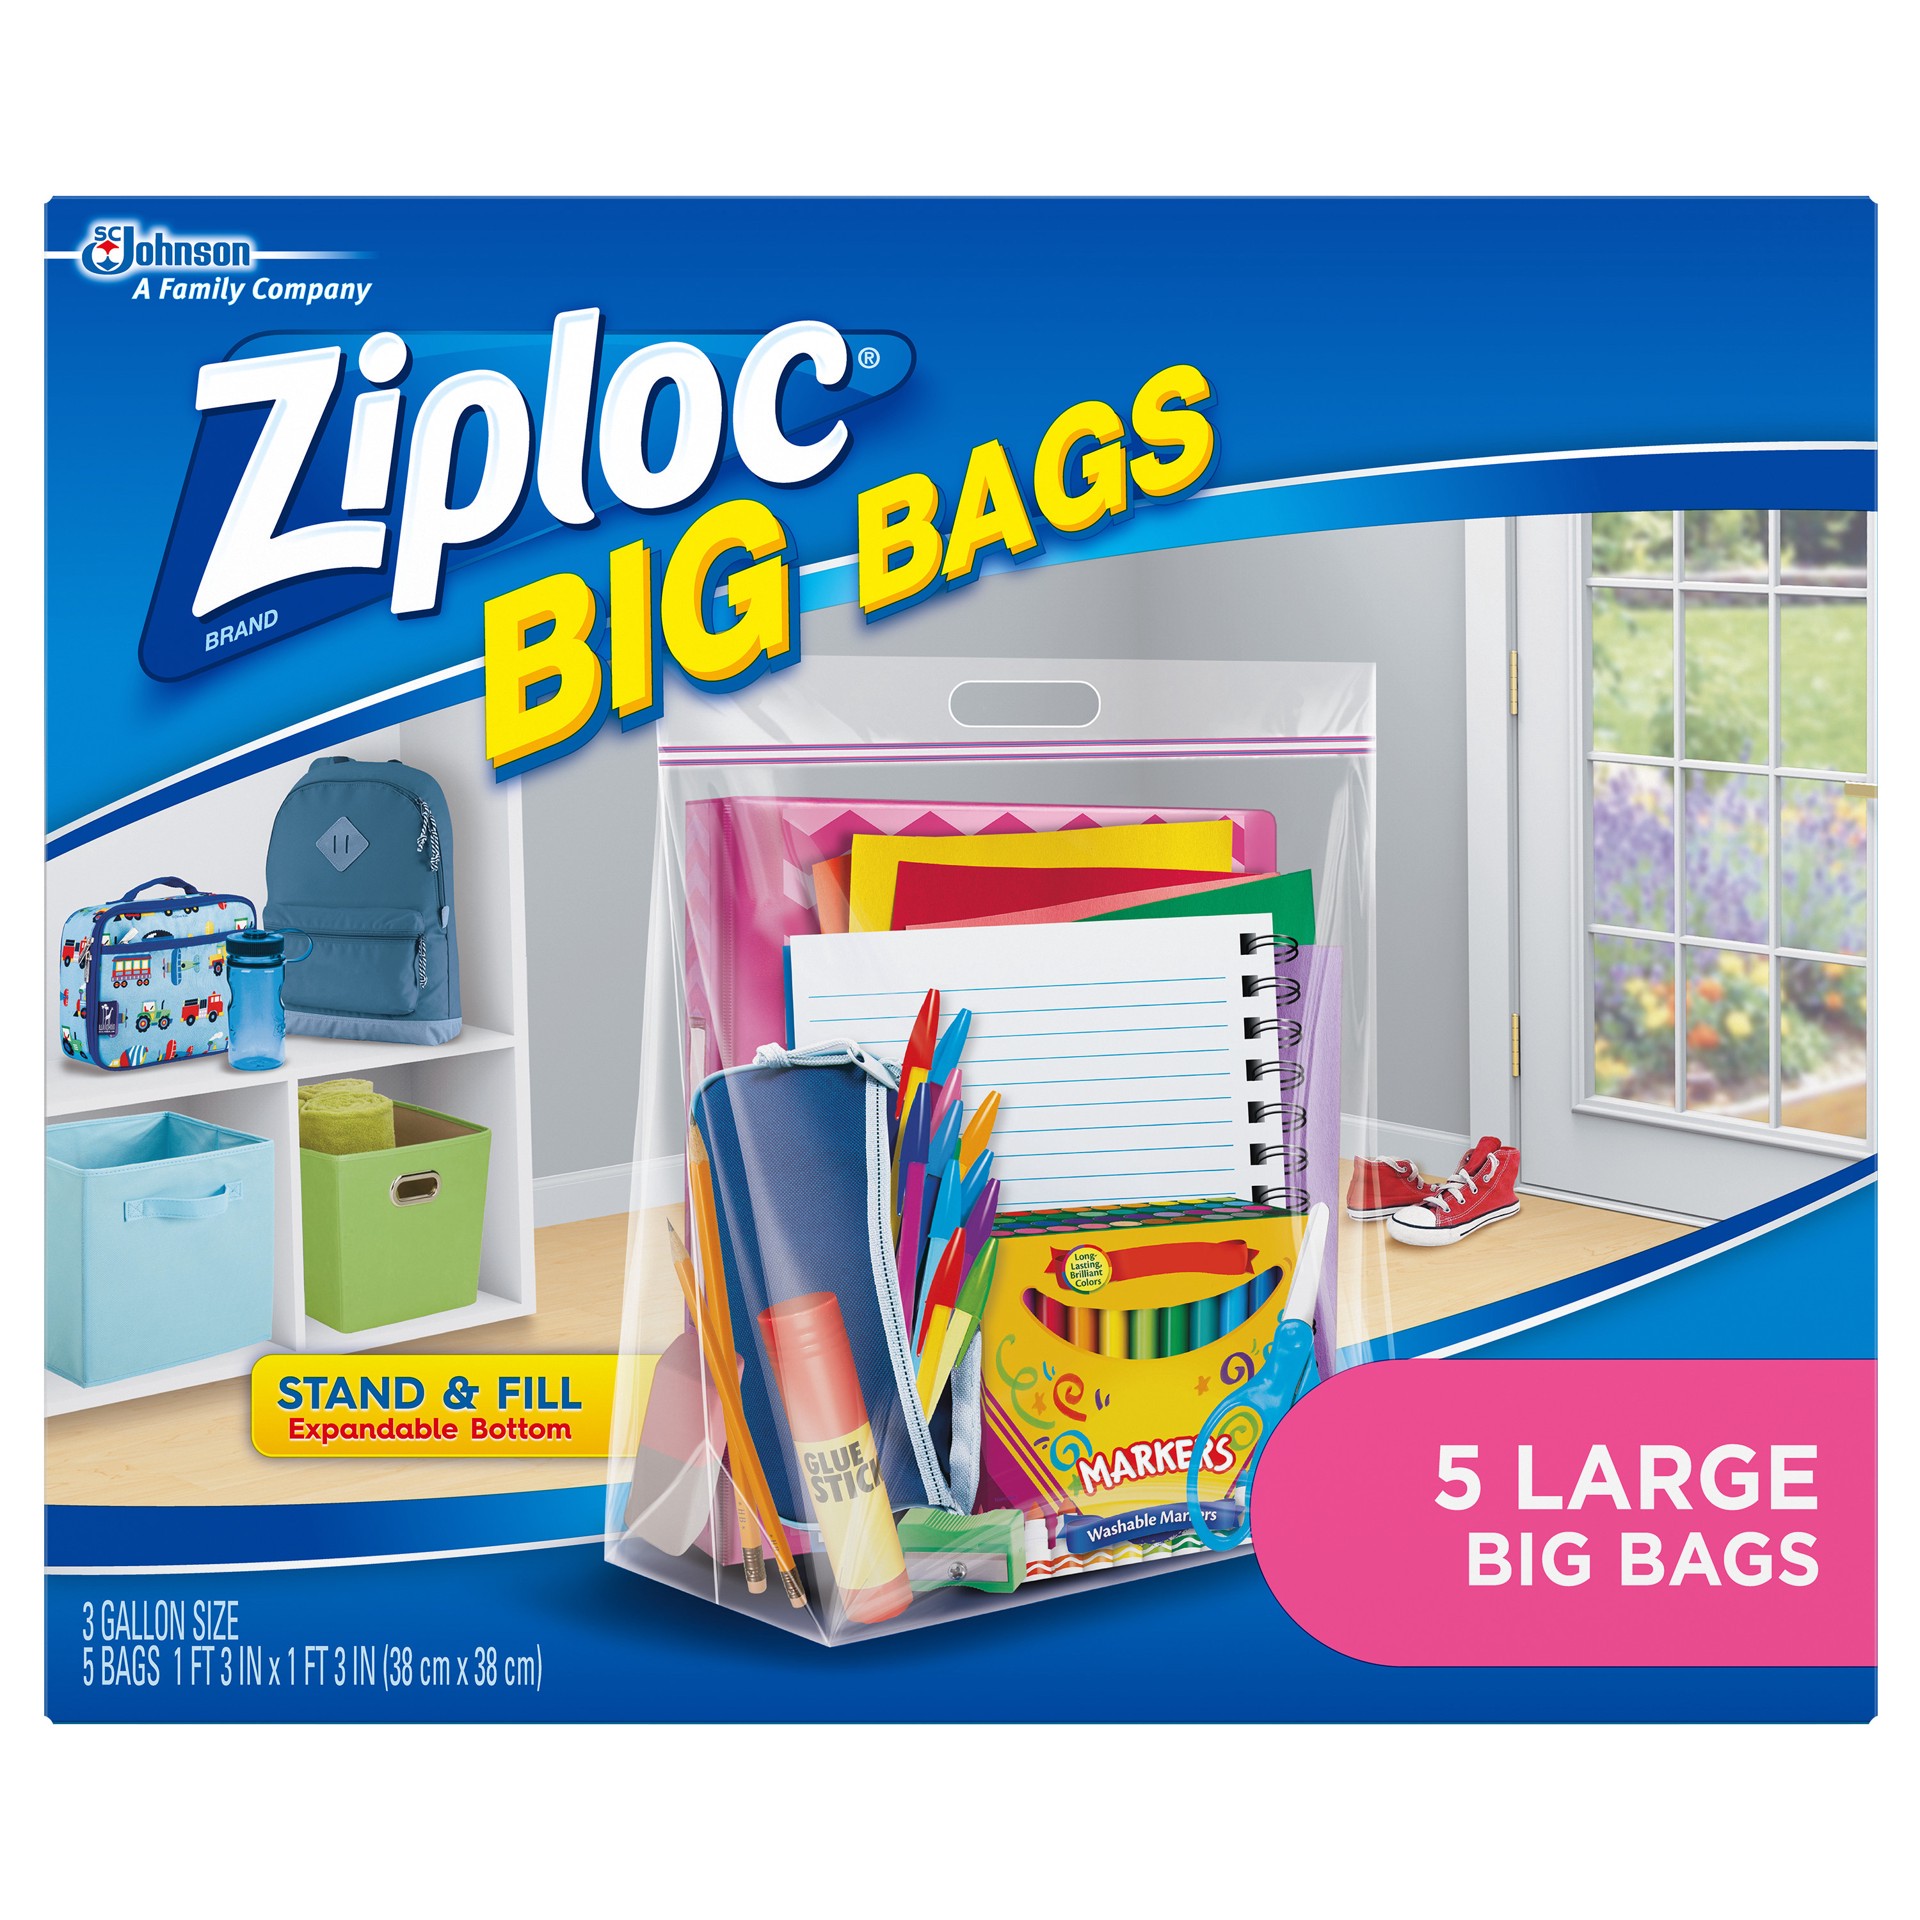 slide 1 of 5, Ziploc Big Bags, Large, Secure Double Zipper, 5 CT,  Expandable Bottom, Heavy-Duty Plastic, Built-In Handles, Flexible Shape to Fit Where Storage Boxes Can't, 5 ct